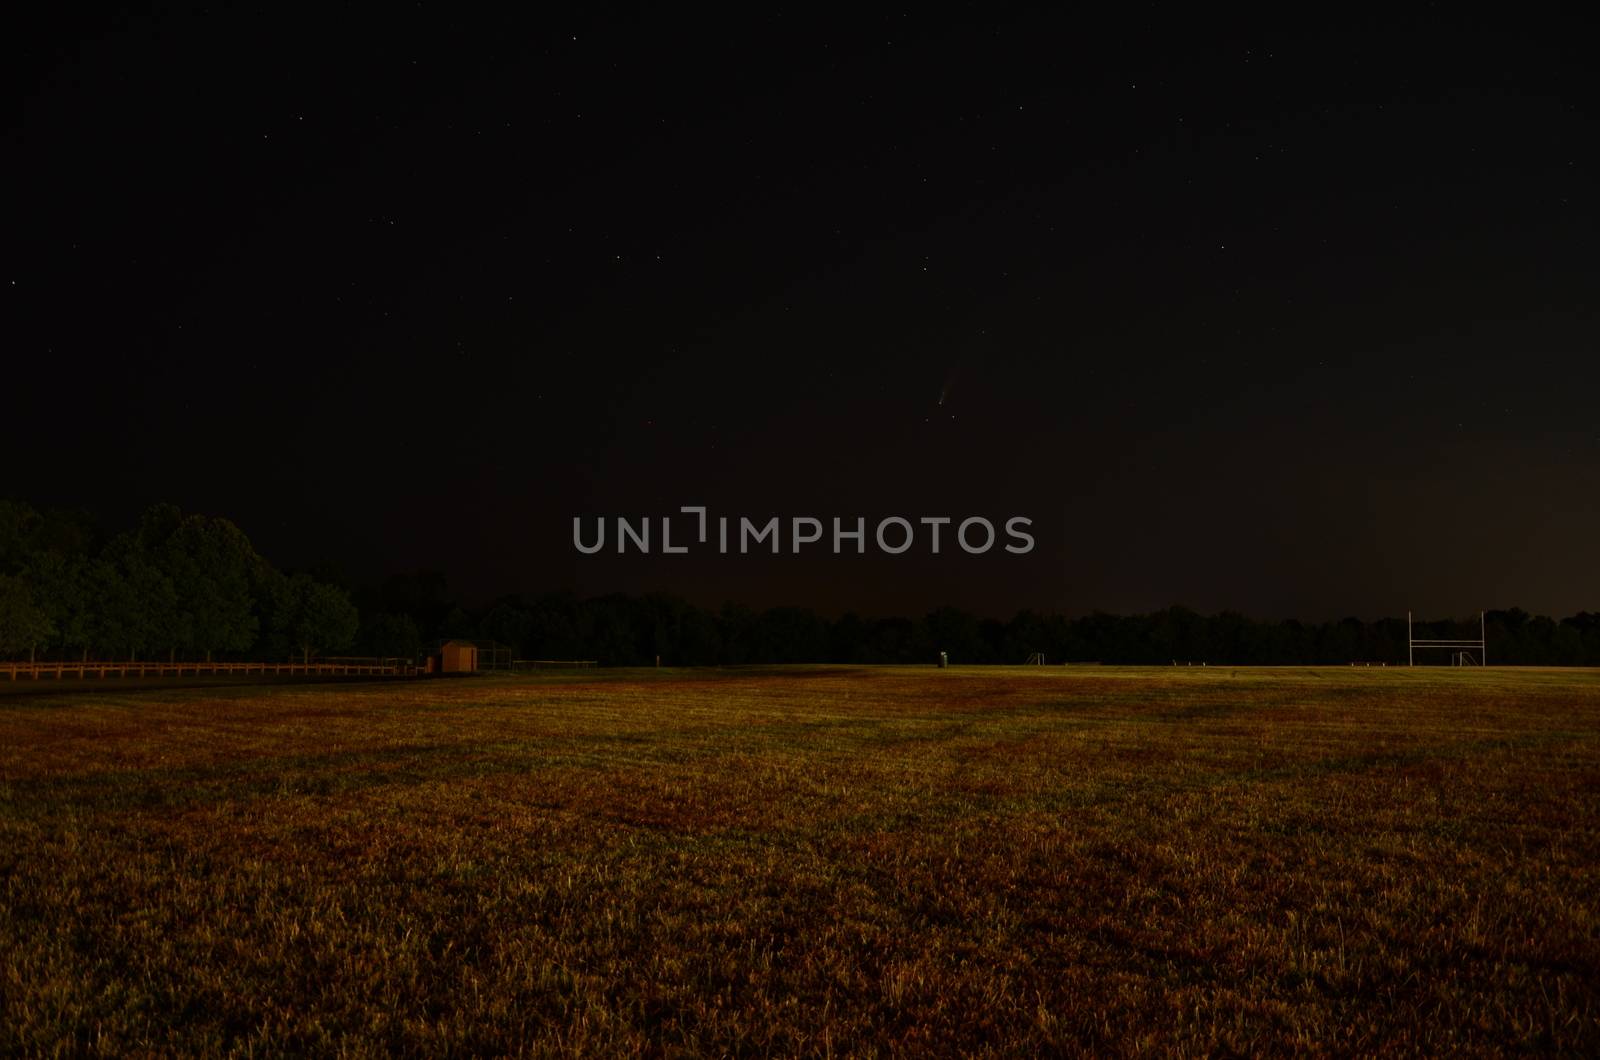 comet Neowise in night sky with stars from Virginia, United States by stockphotofan1